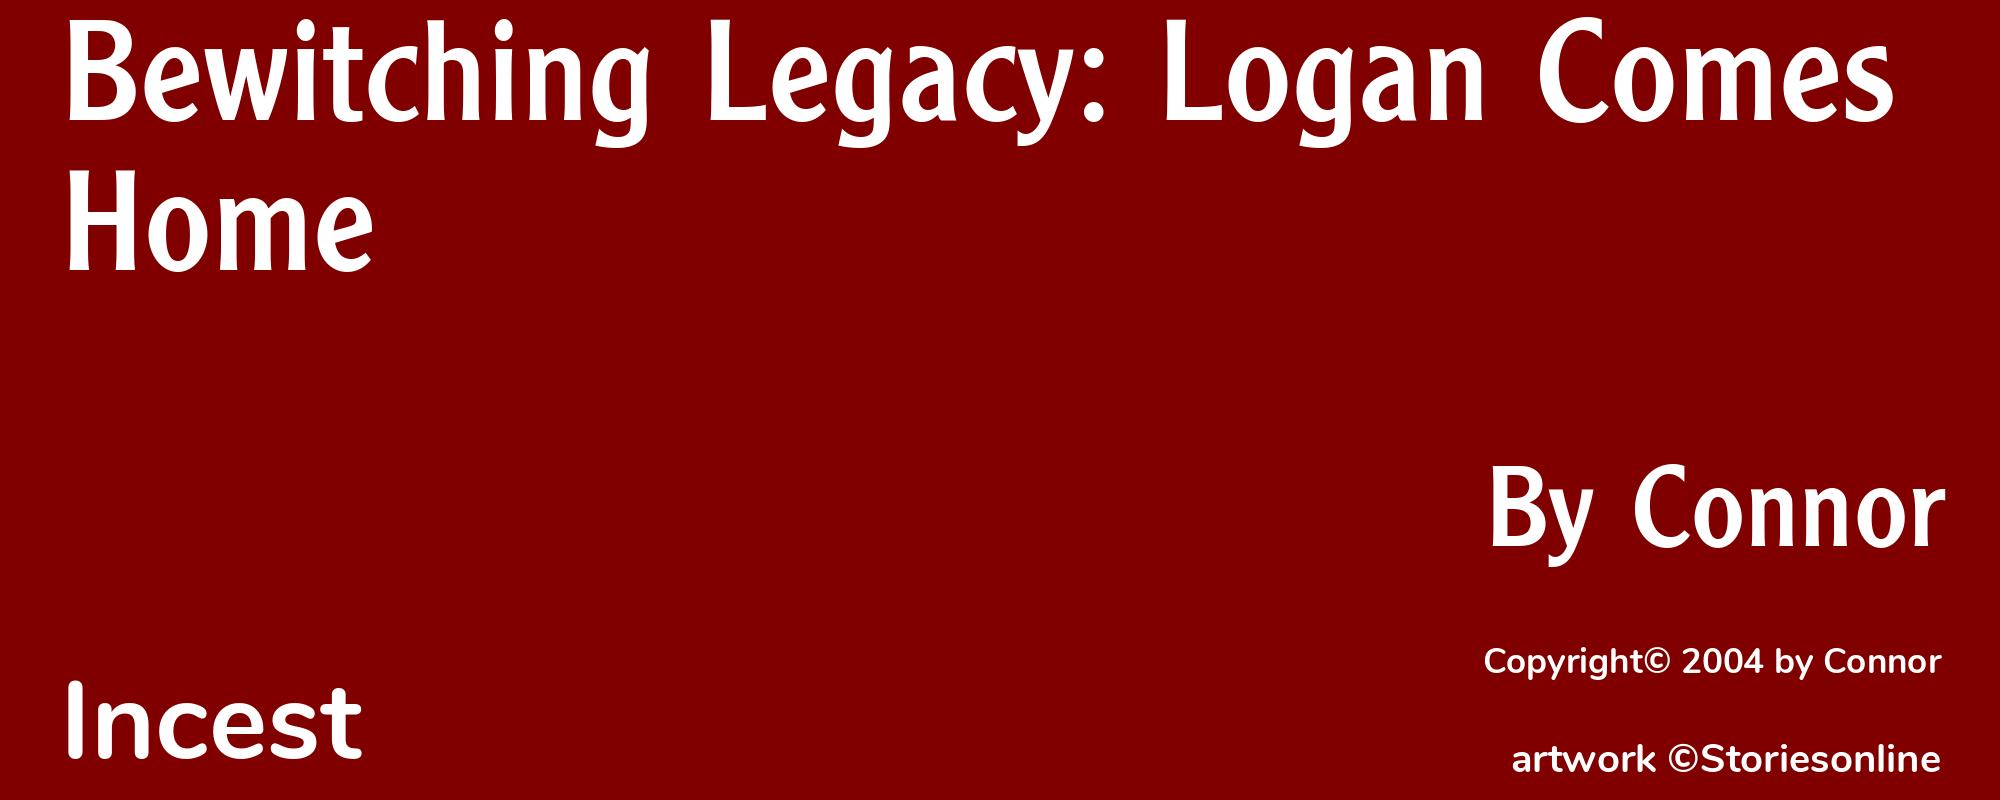 Bewitching Legacy: Logan Comes Home - Cover